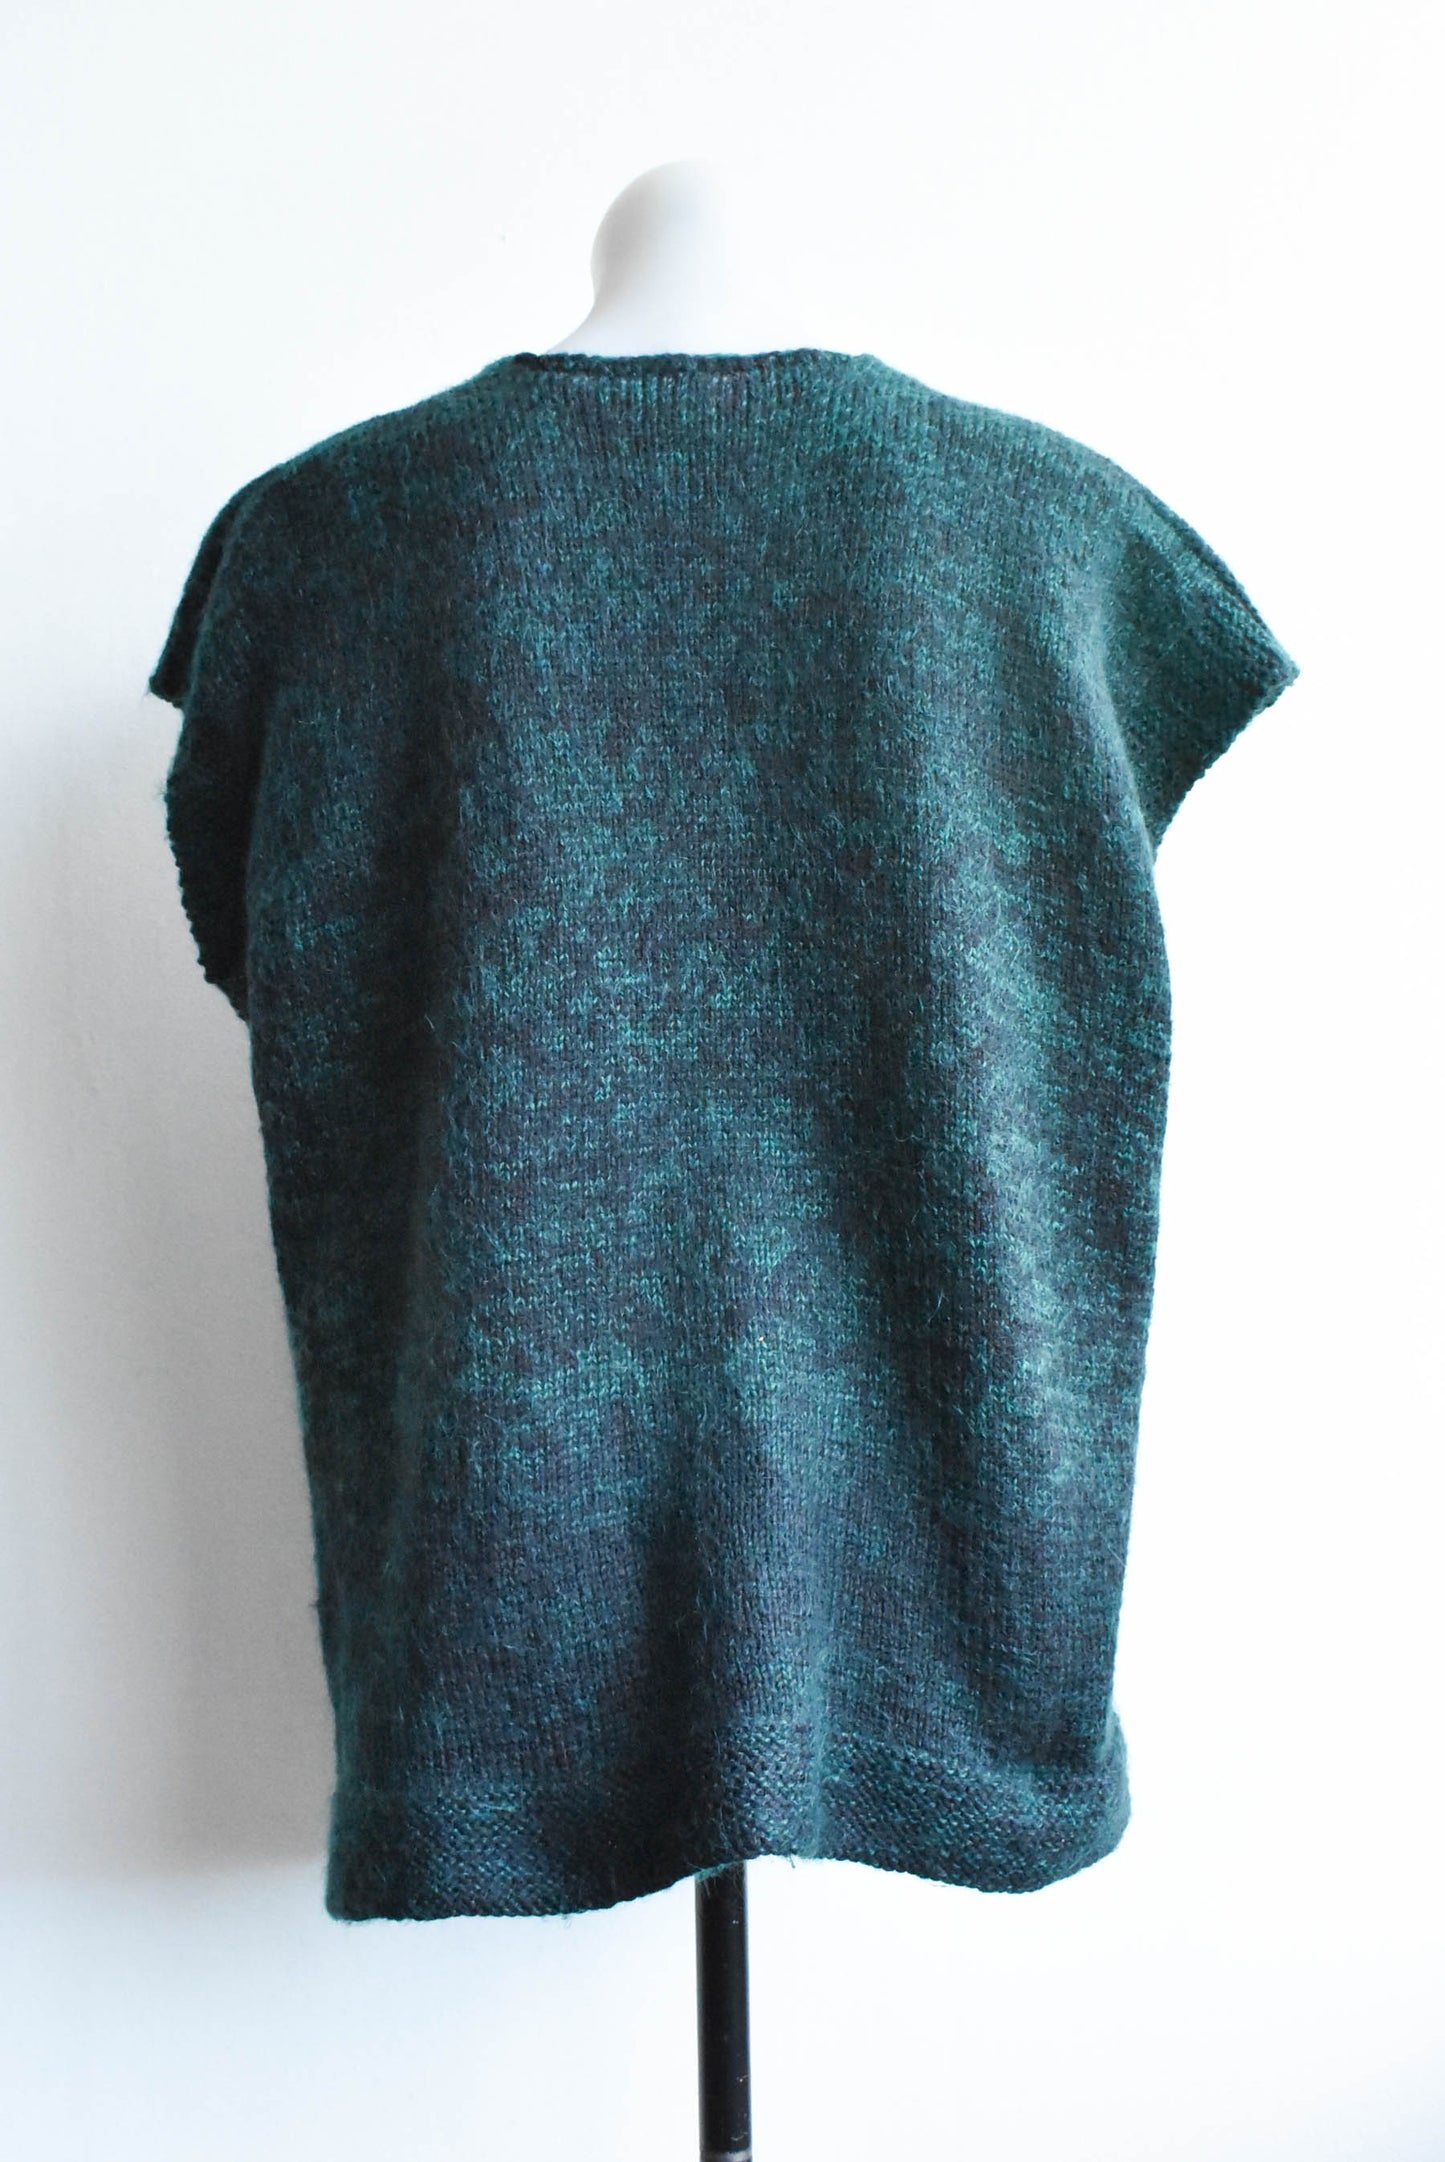 Handknitted green and black variegated shrug